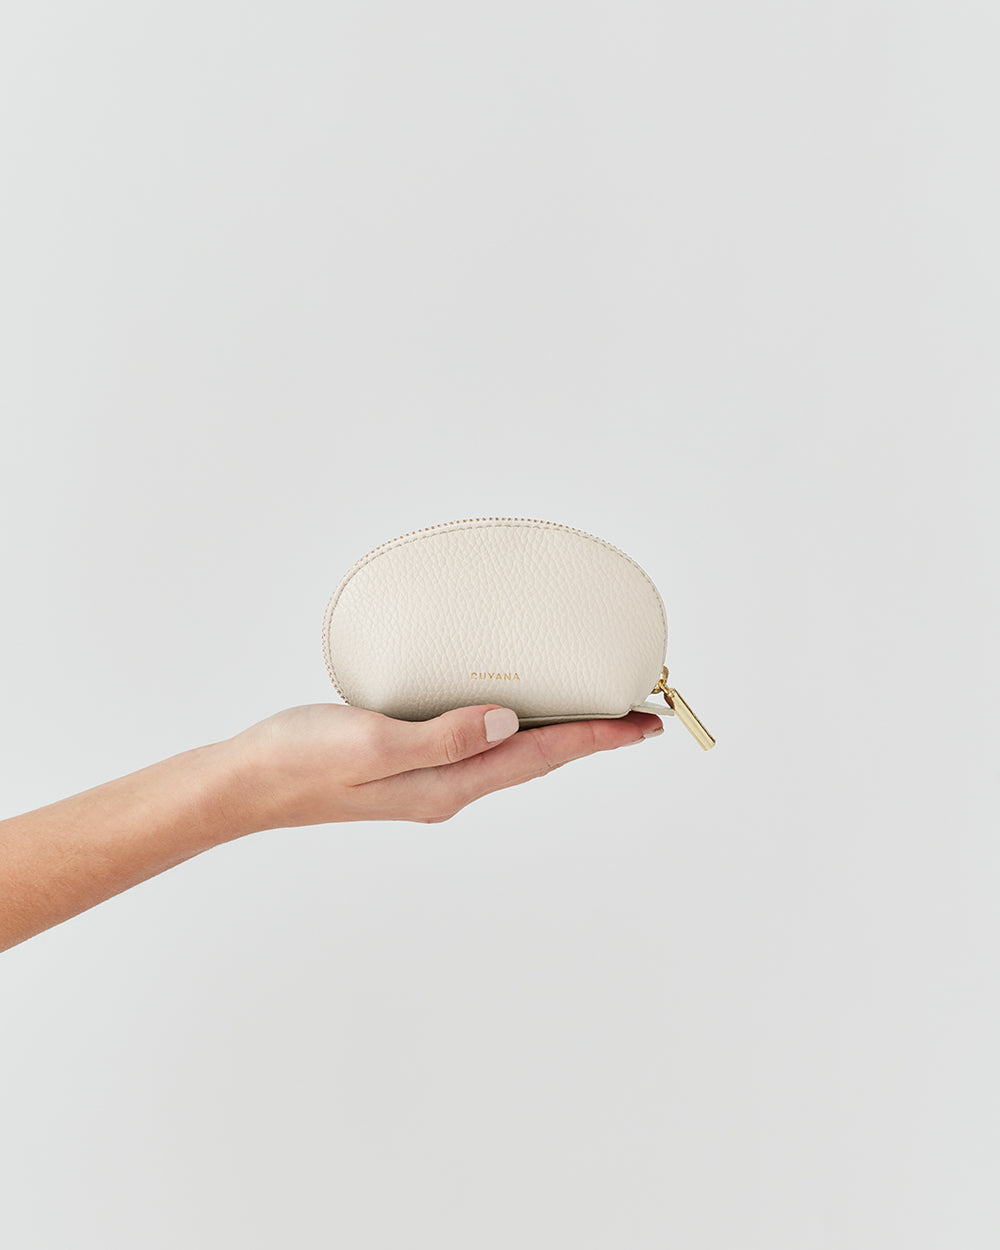 Hand holding a small zippered pouch against a plain background.